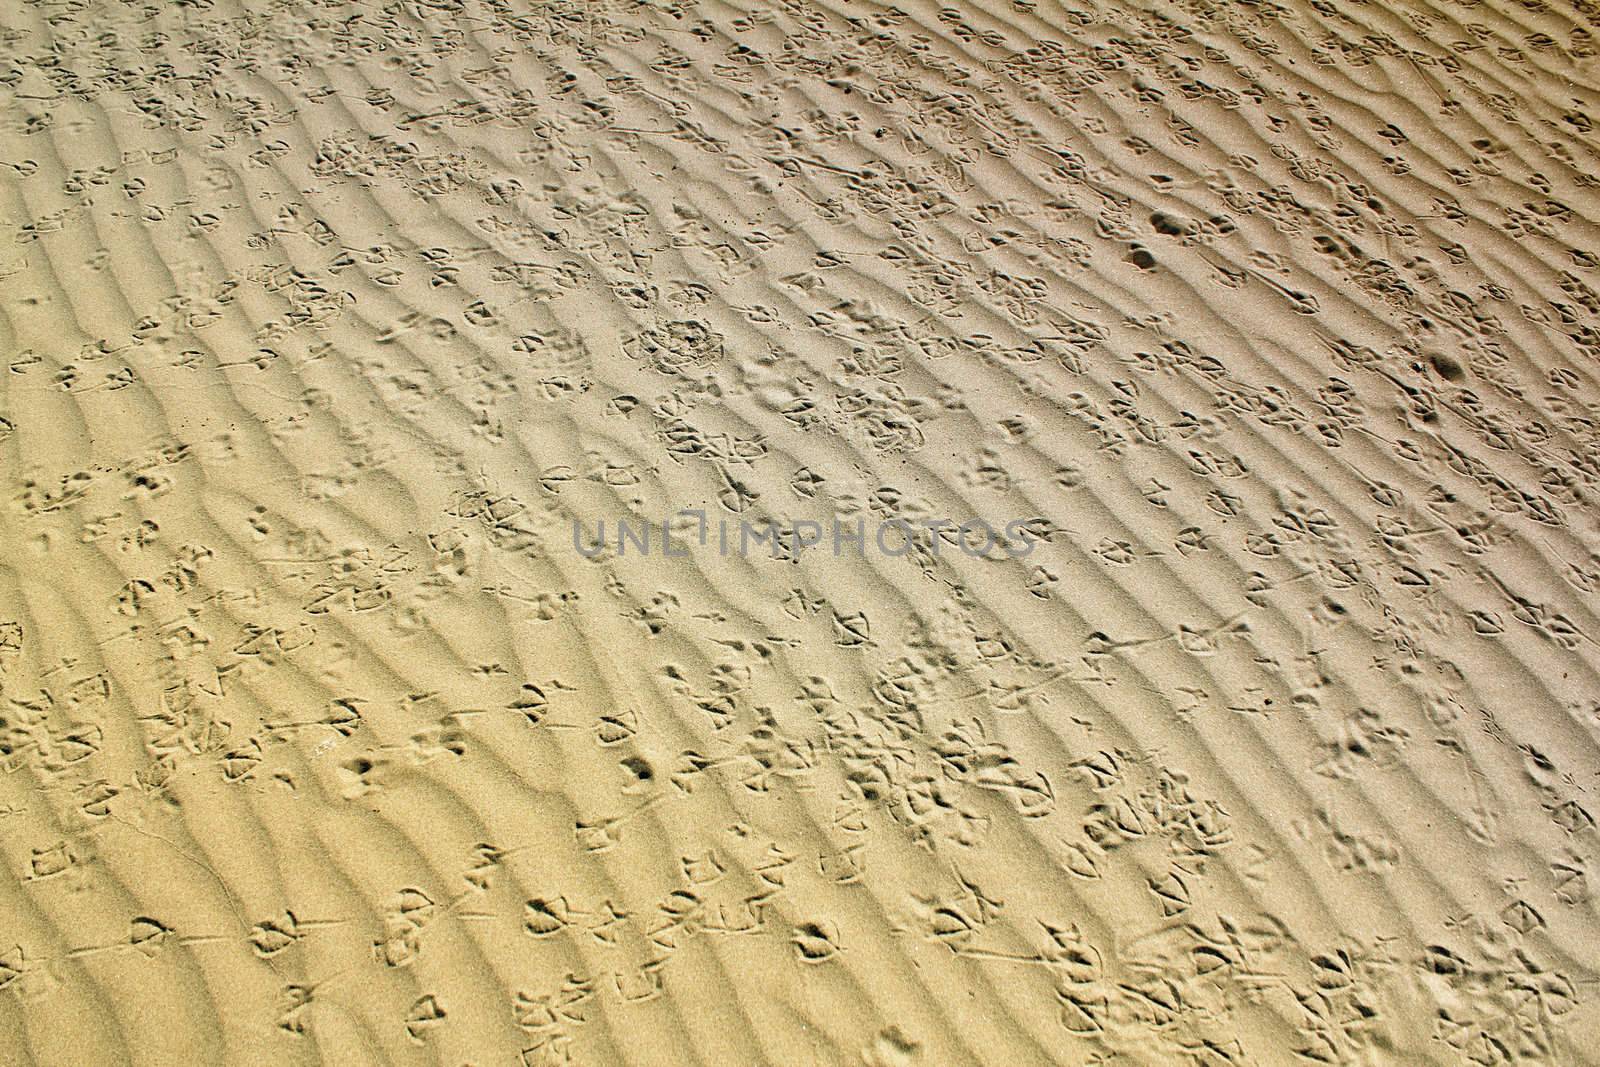 bird tracks in the sand by goce